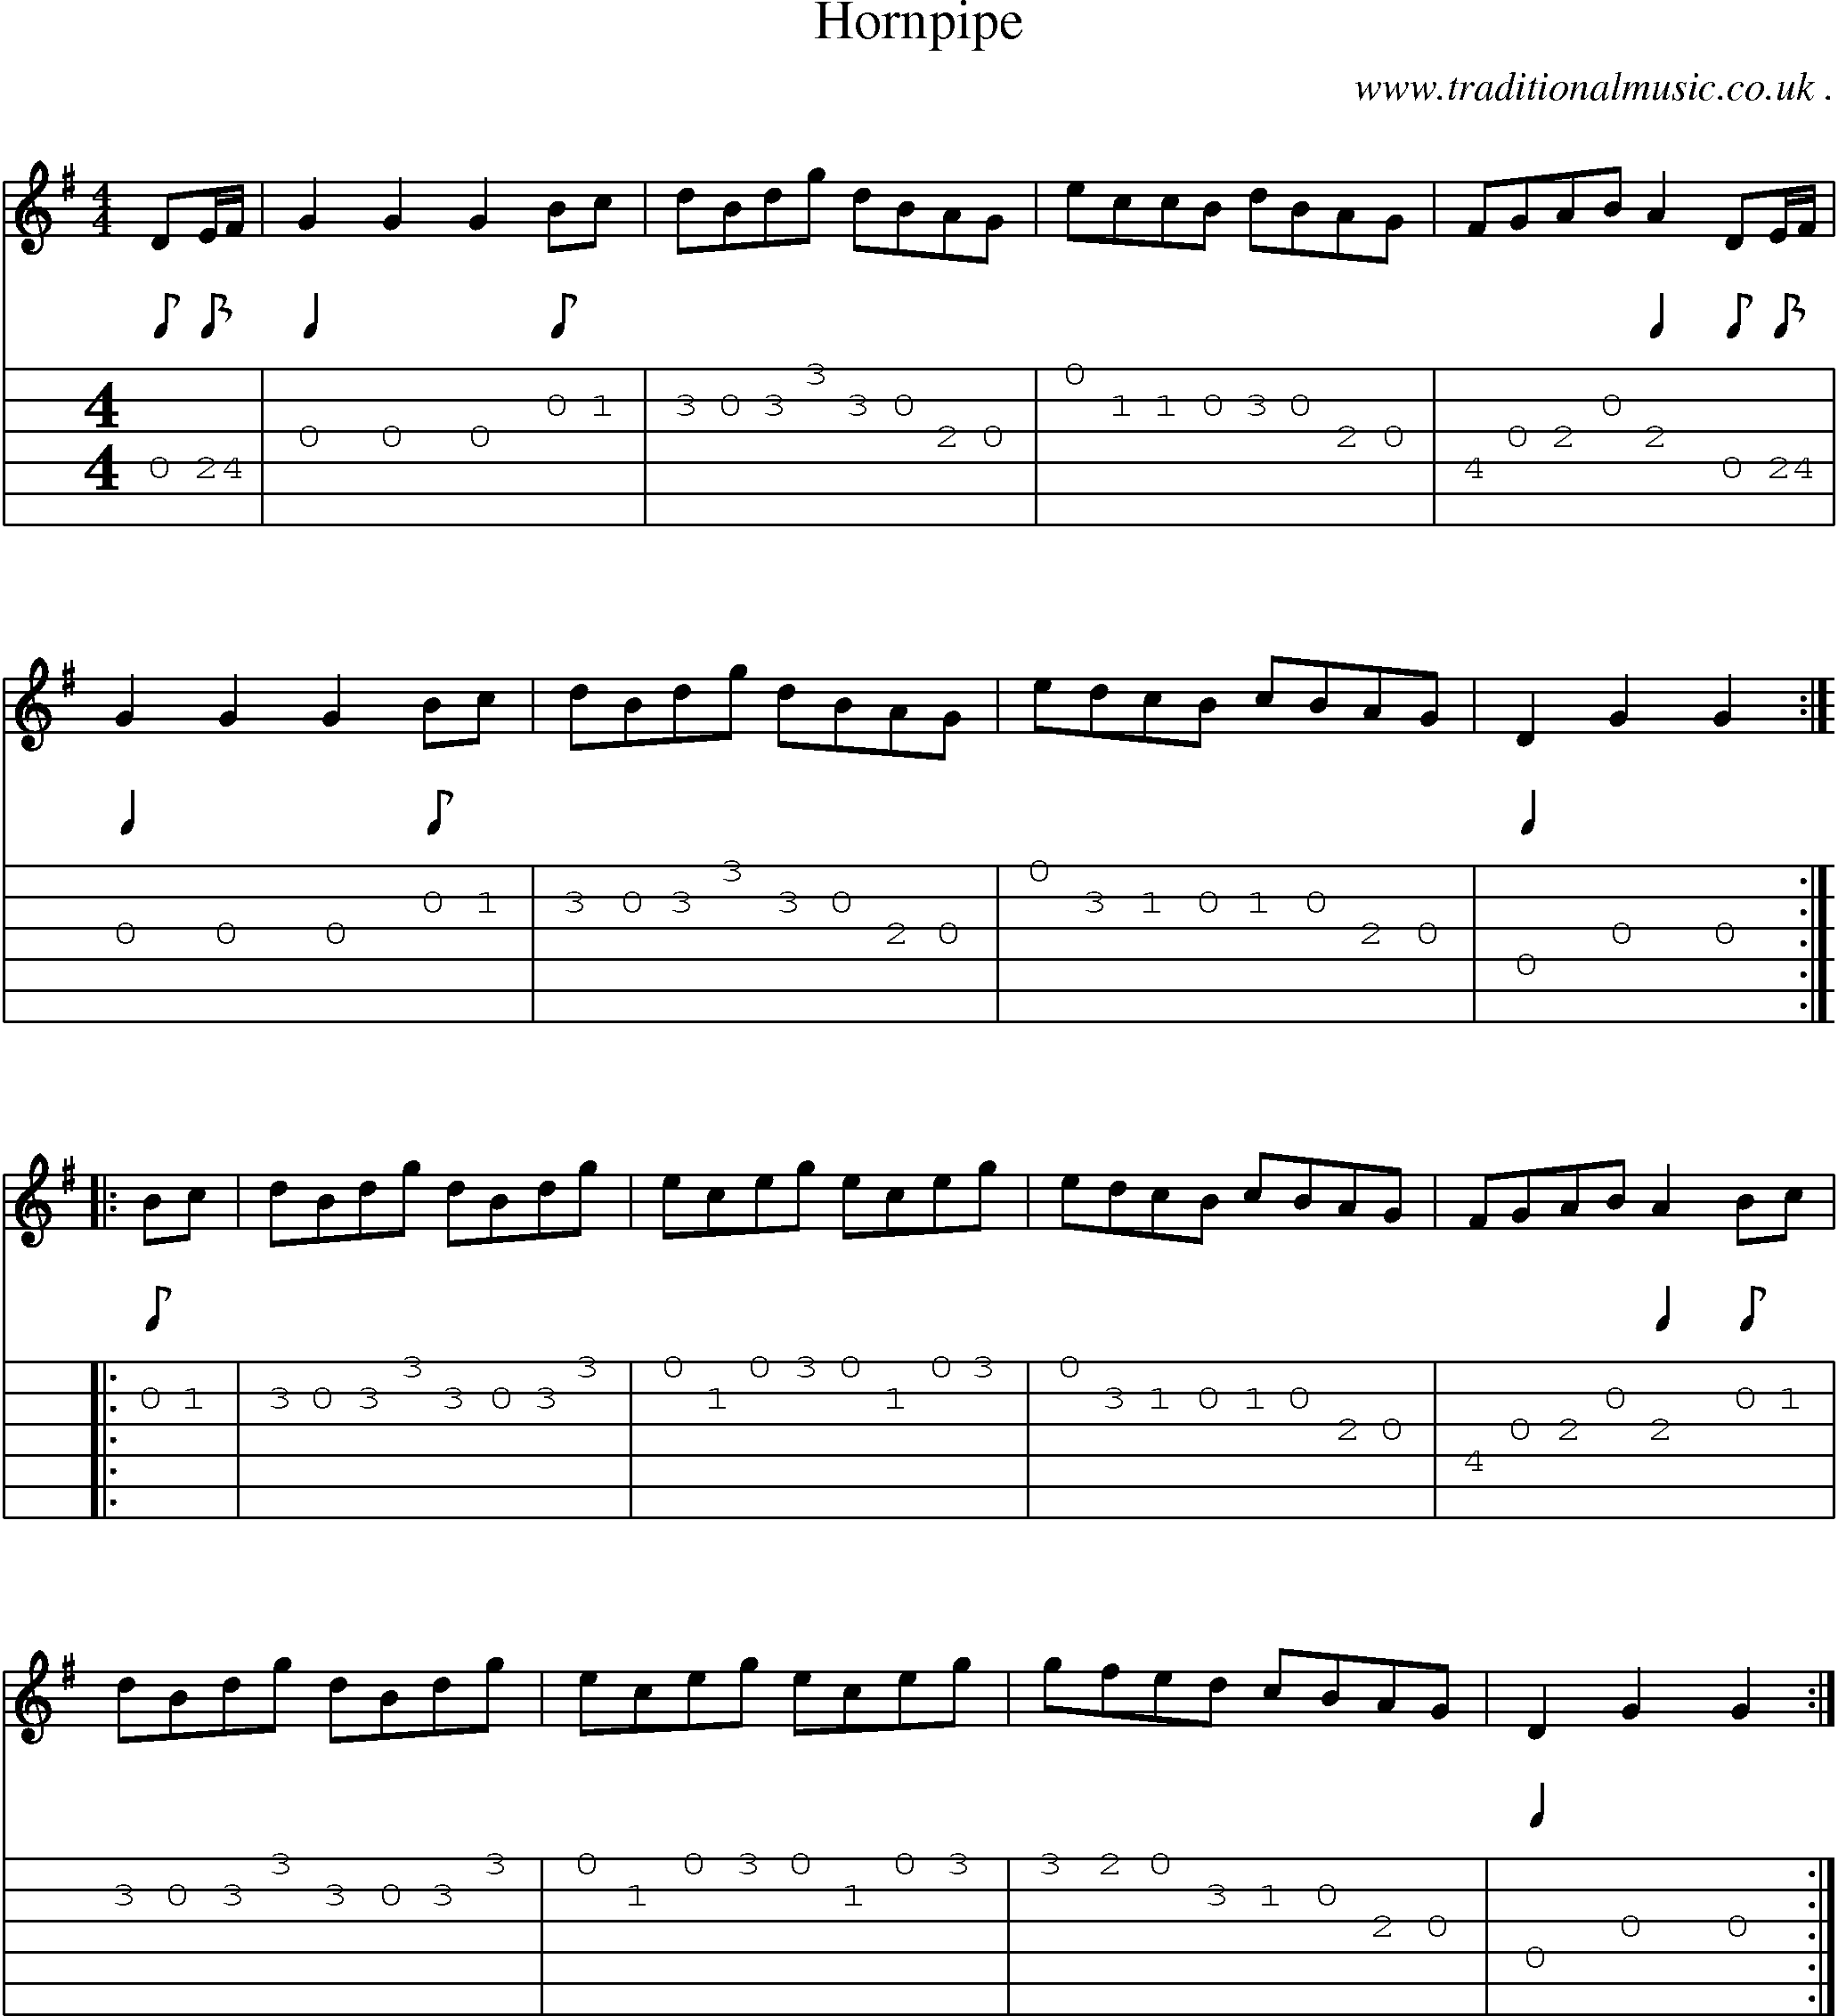 Sheet-Music and Guitar Tabs for Hornpipe